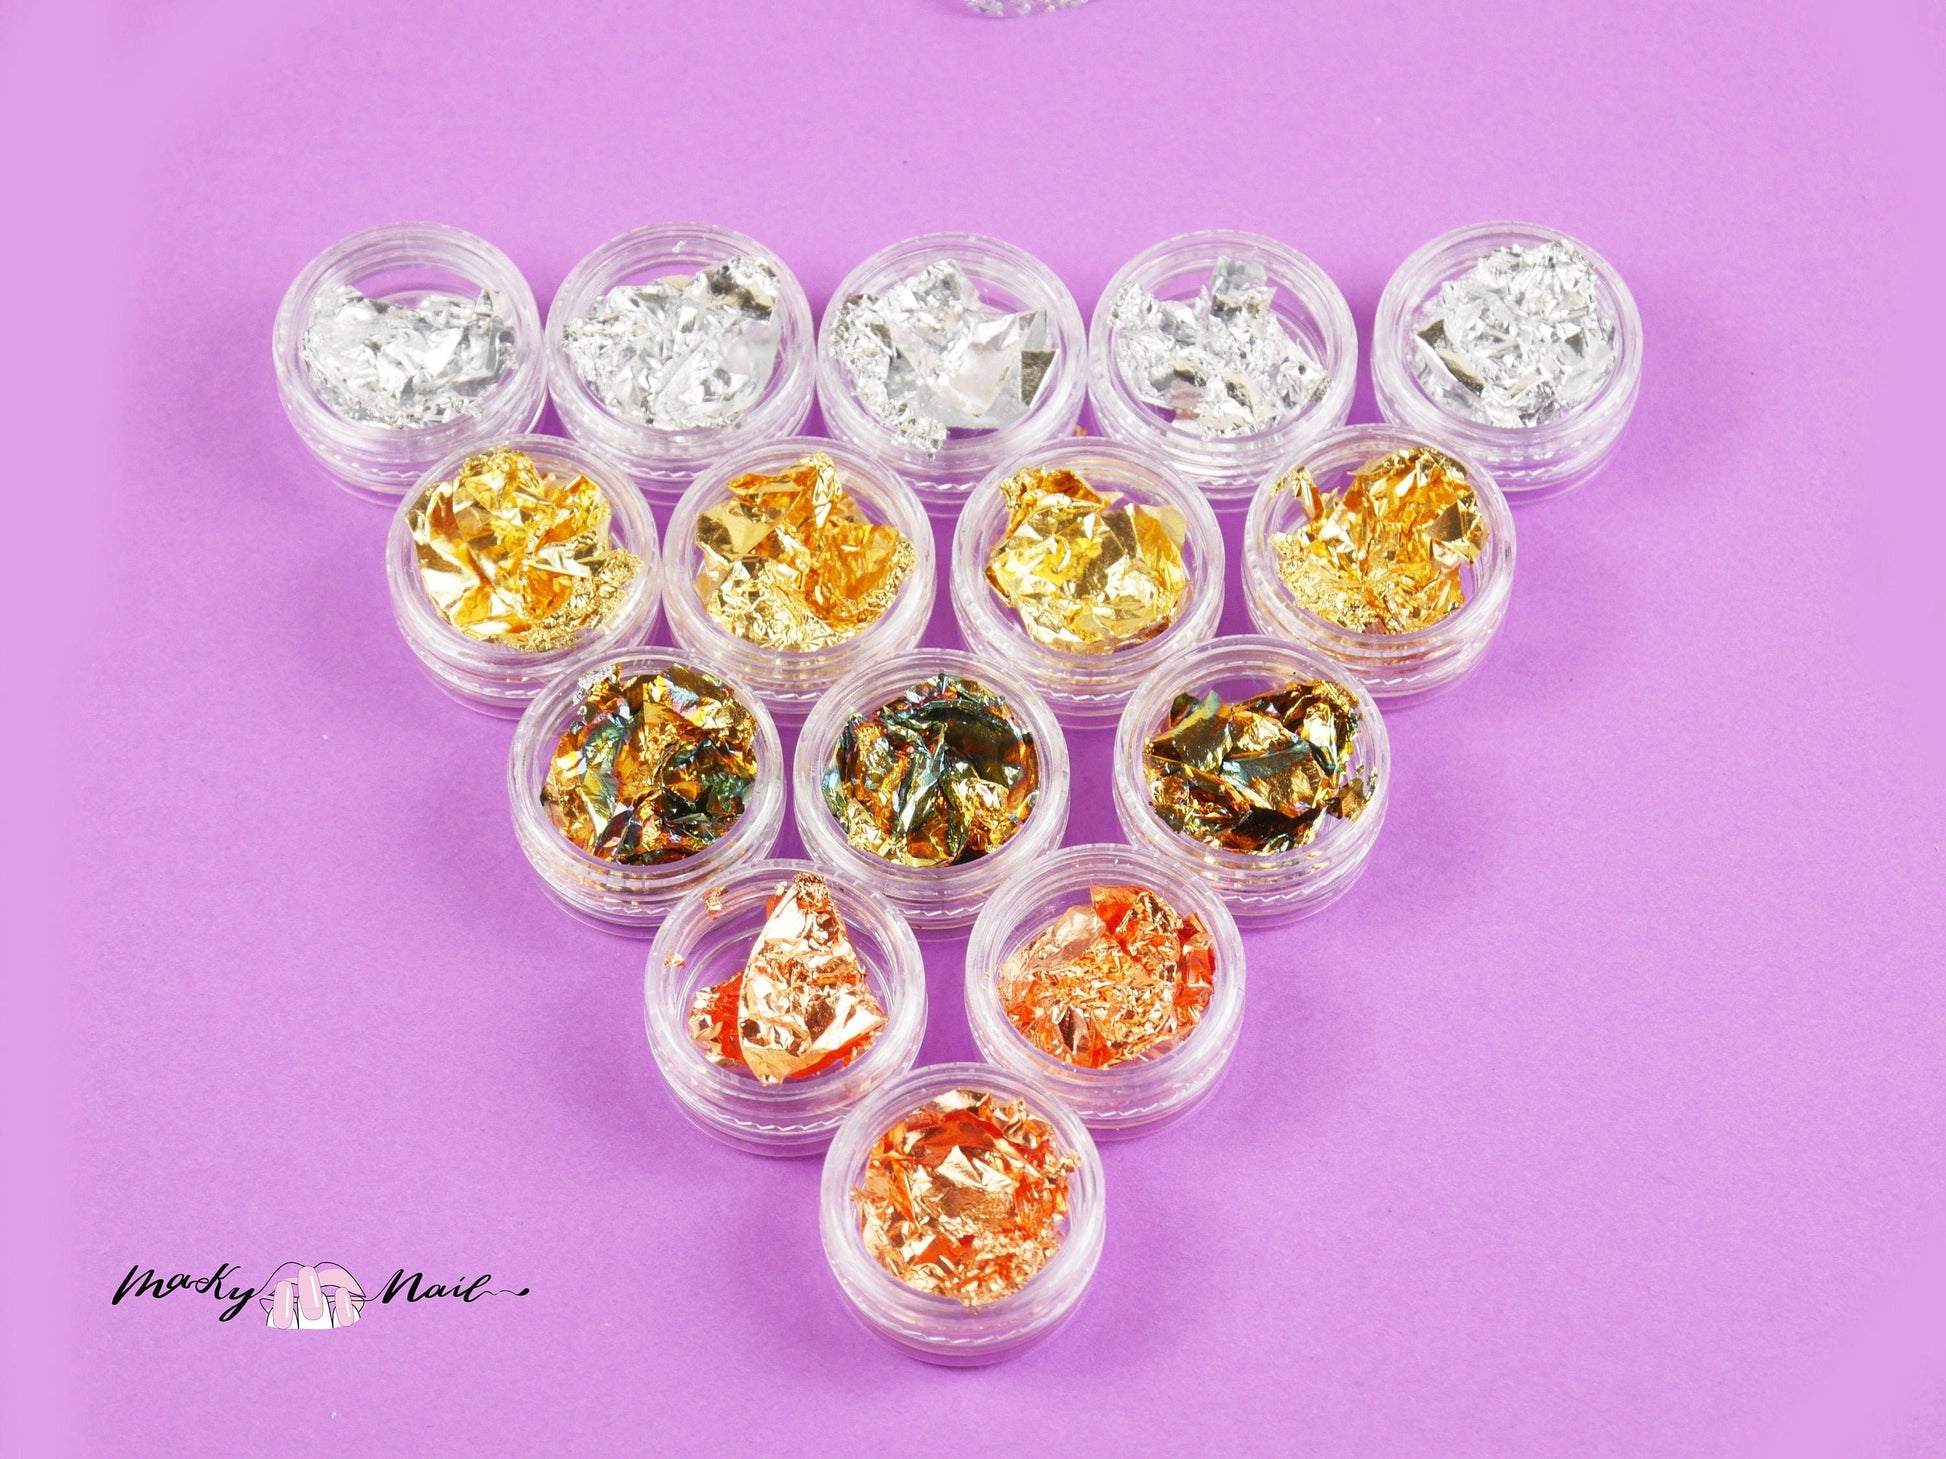 12 cases Gold Silver Foil Nail Art Design Supply